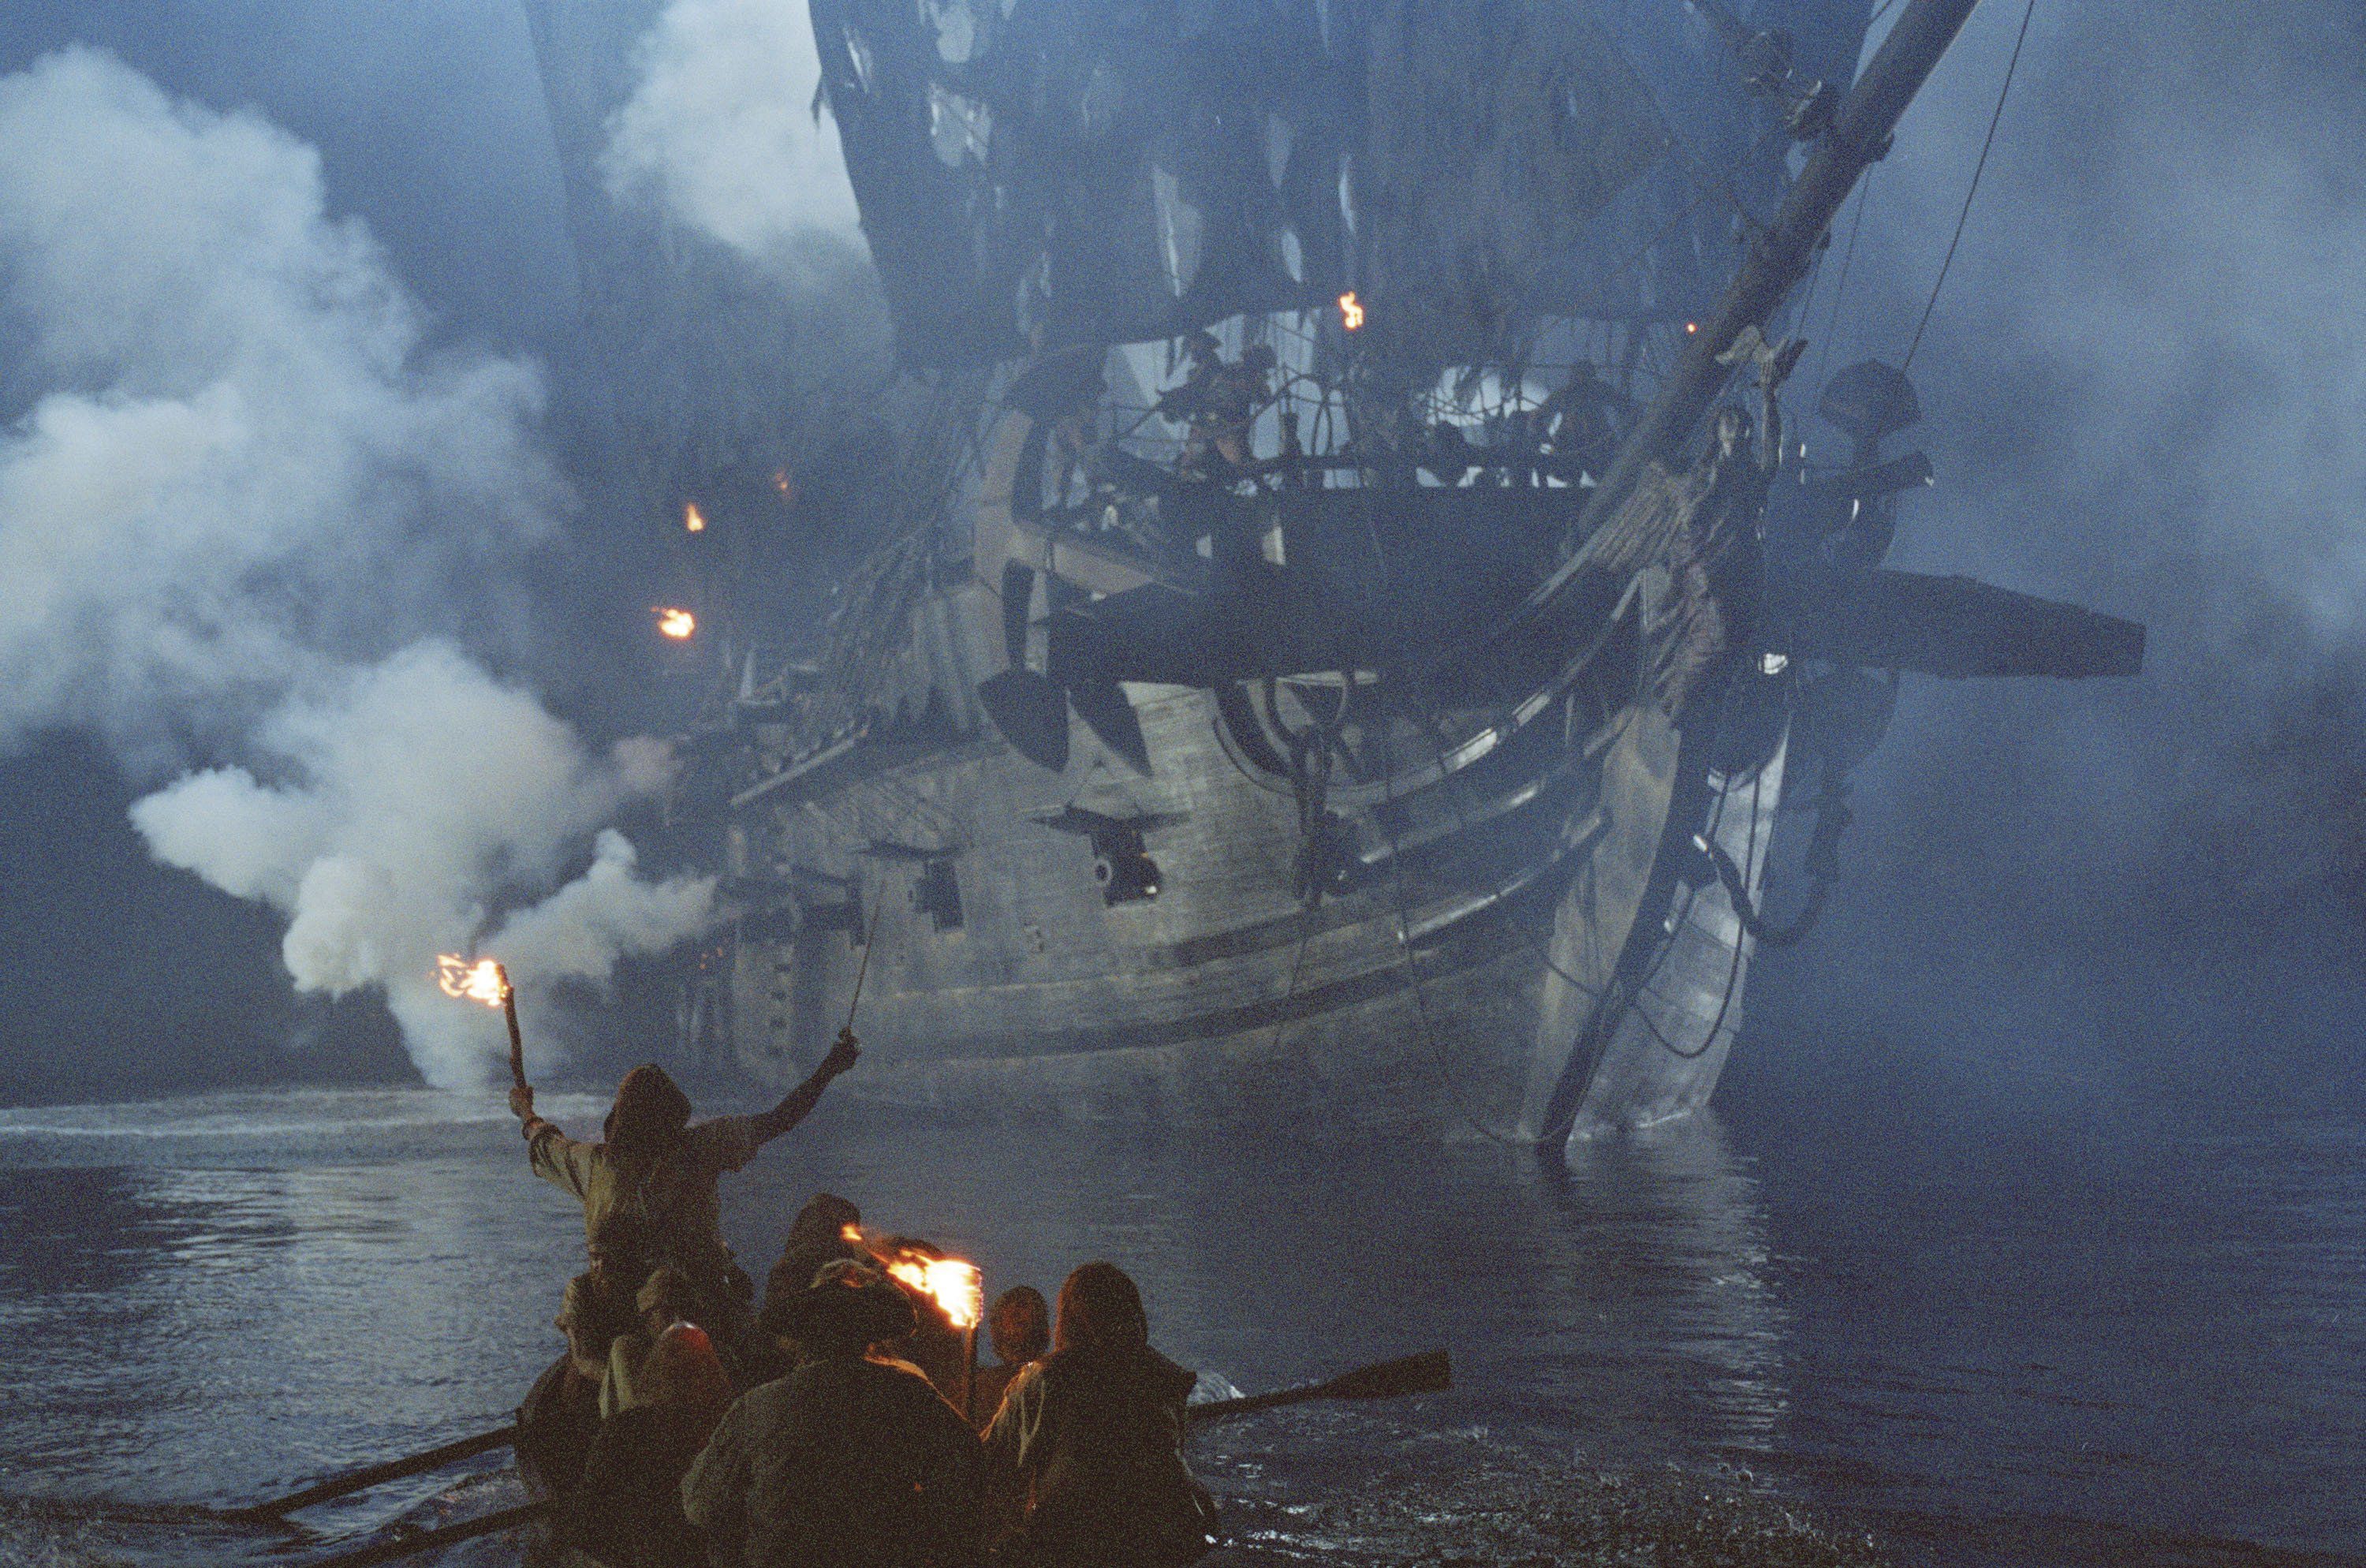 Movie Pirates Of The Caribbean The Curse Of The Black Pearl Wallpaper:3000x1988